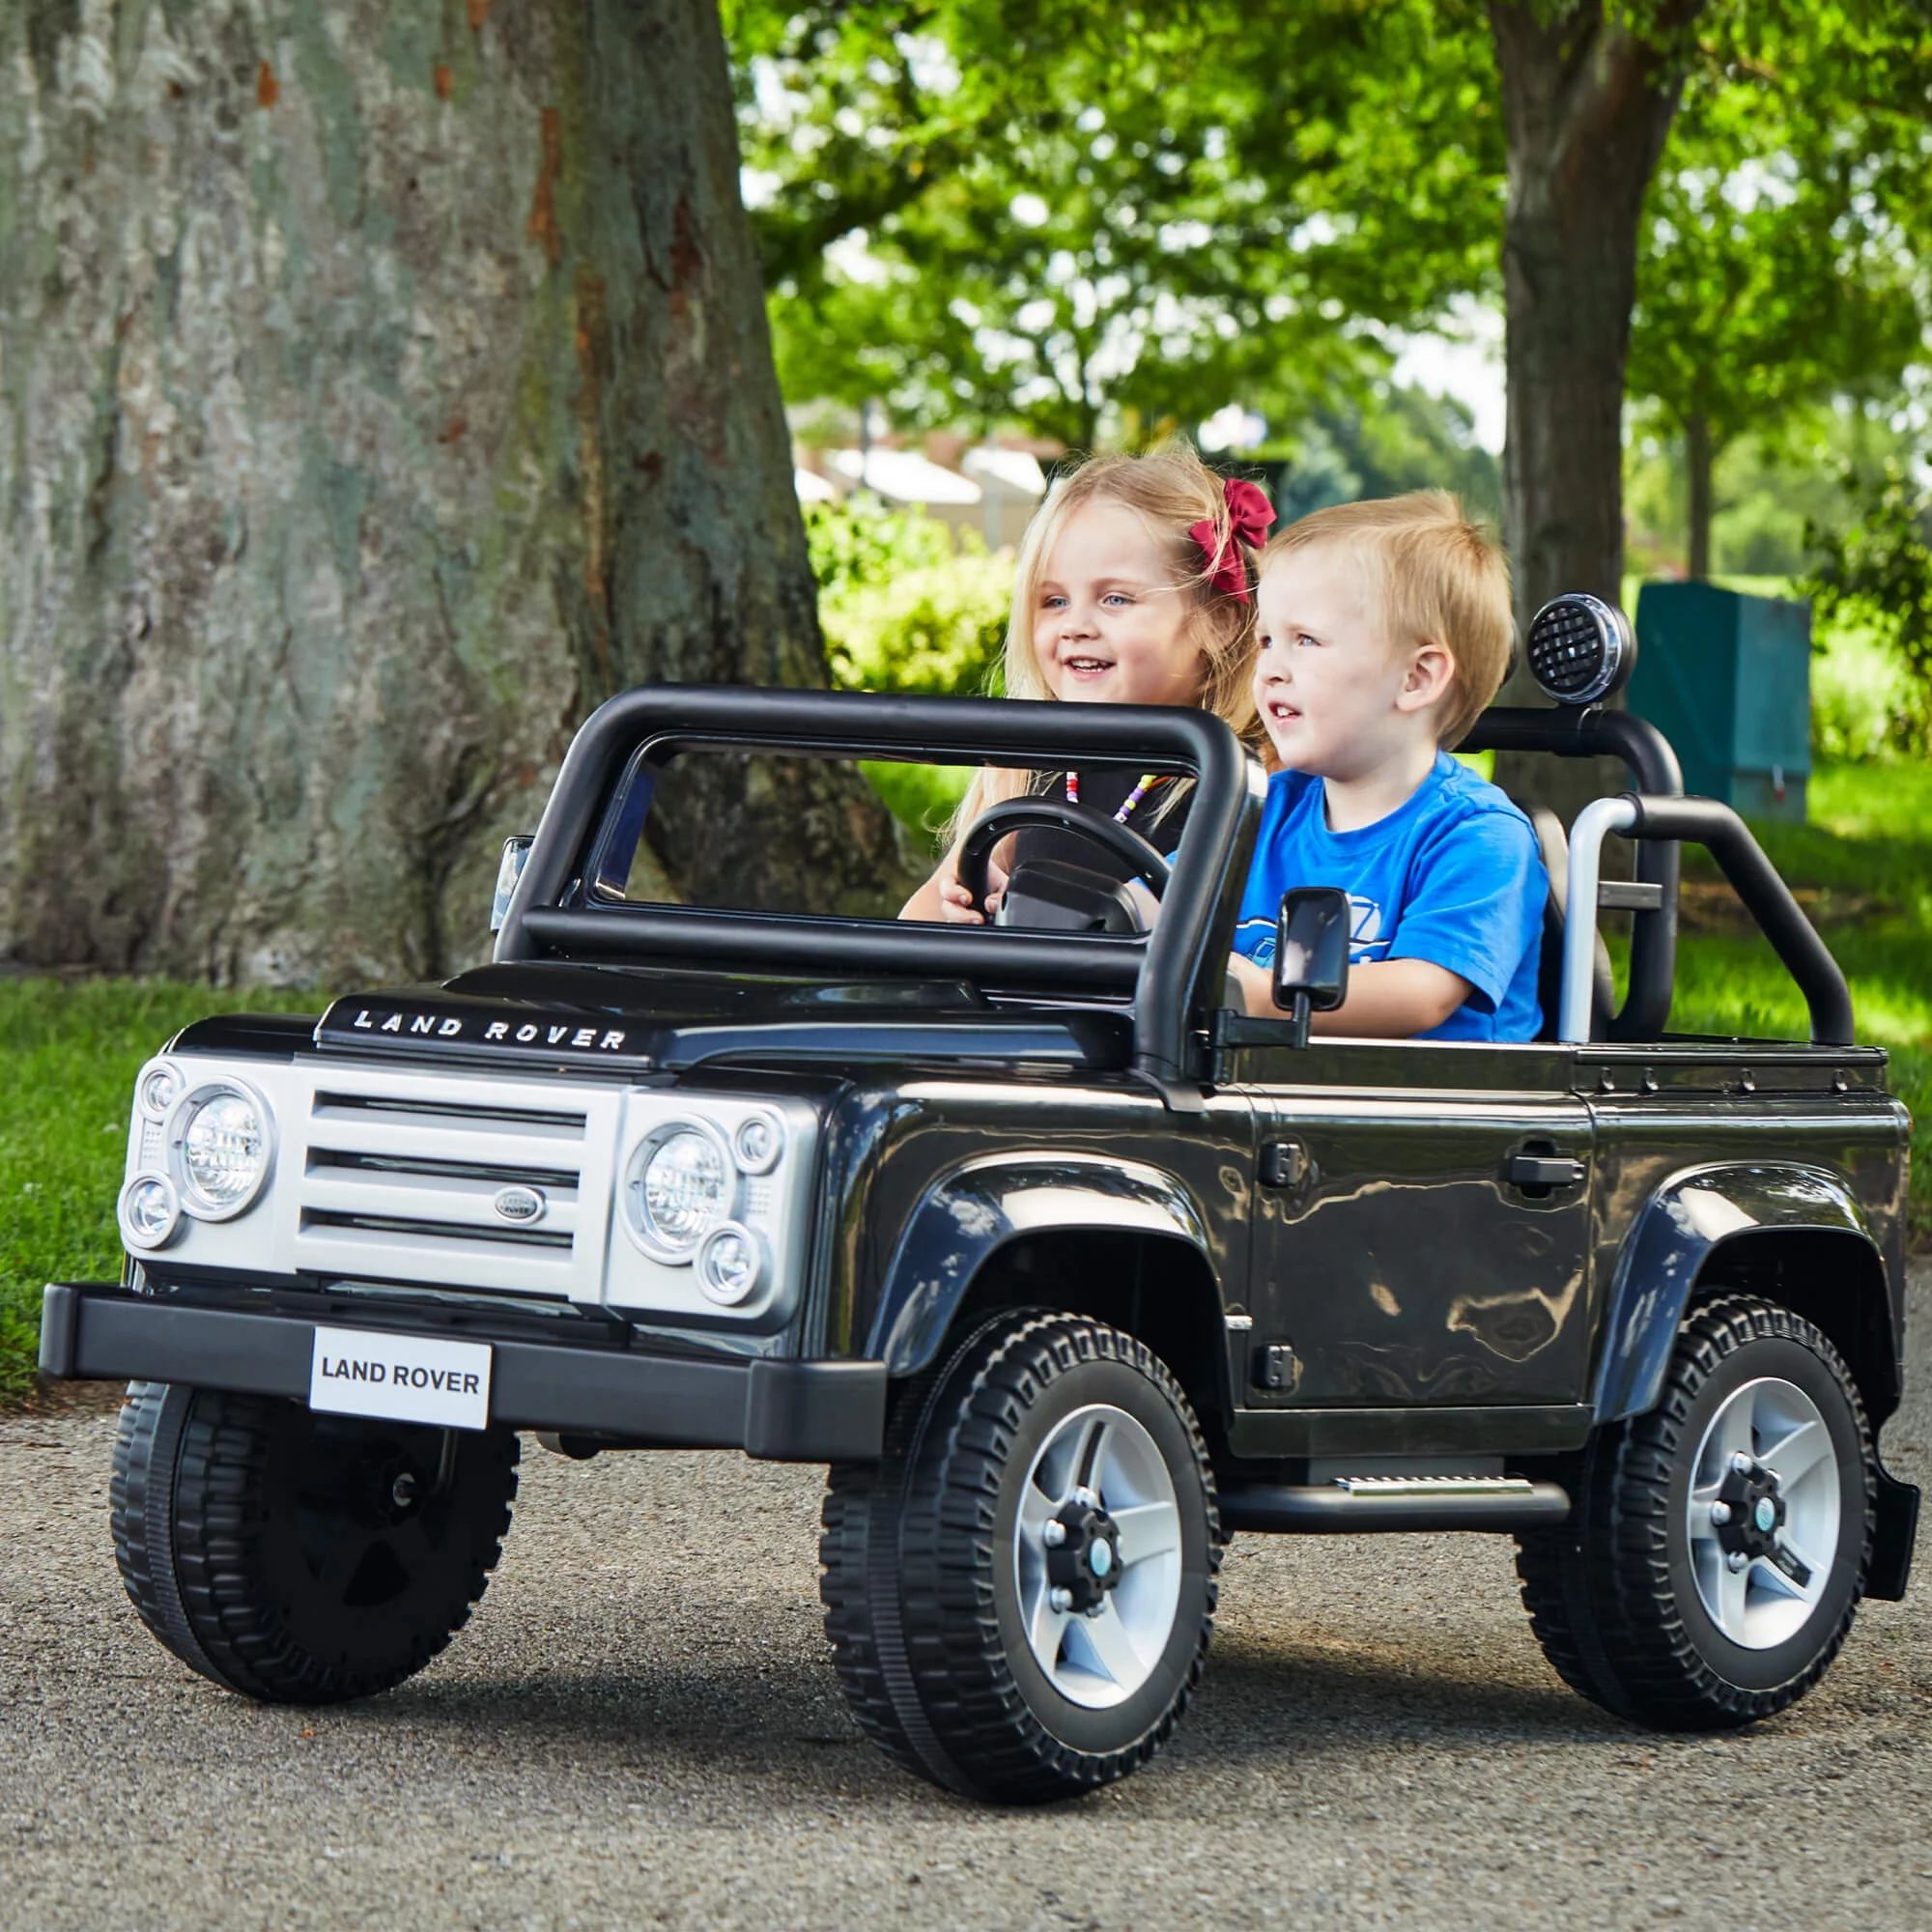 12V Land Rover Electric Battery-Powered Ride-On Car for Kids | Walmart (US)